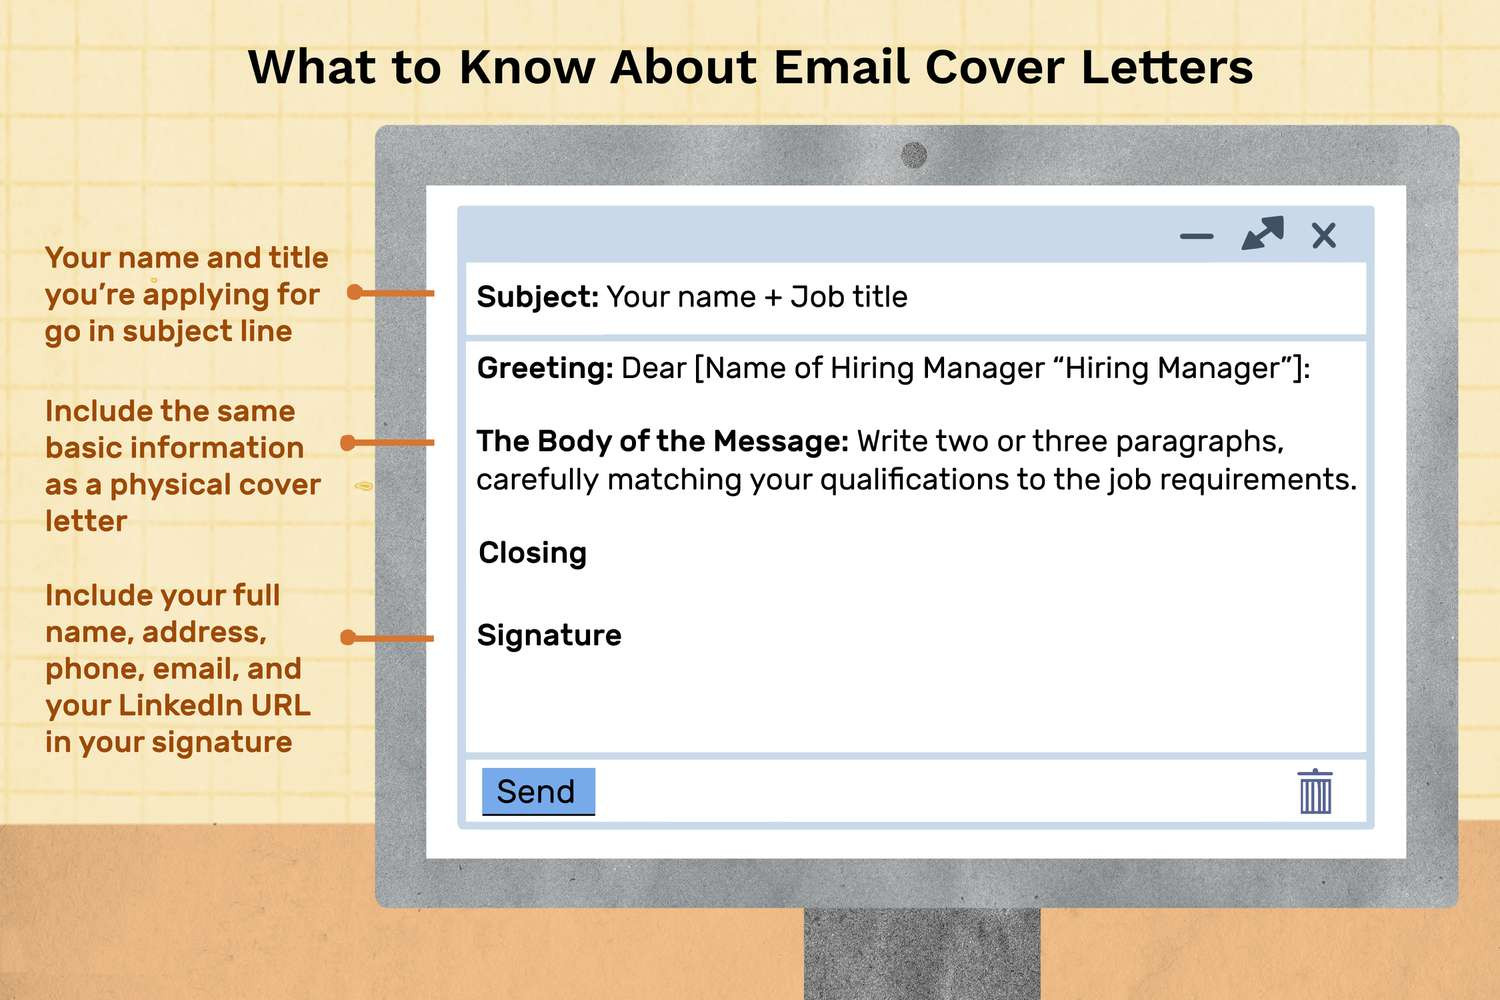 Email Resume to Hiring Manager Sample Sample Email Cover Letter Message for A Hiring Manager